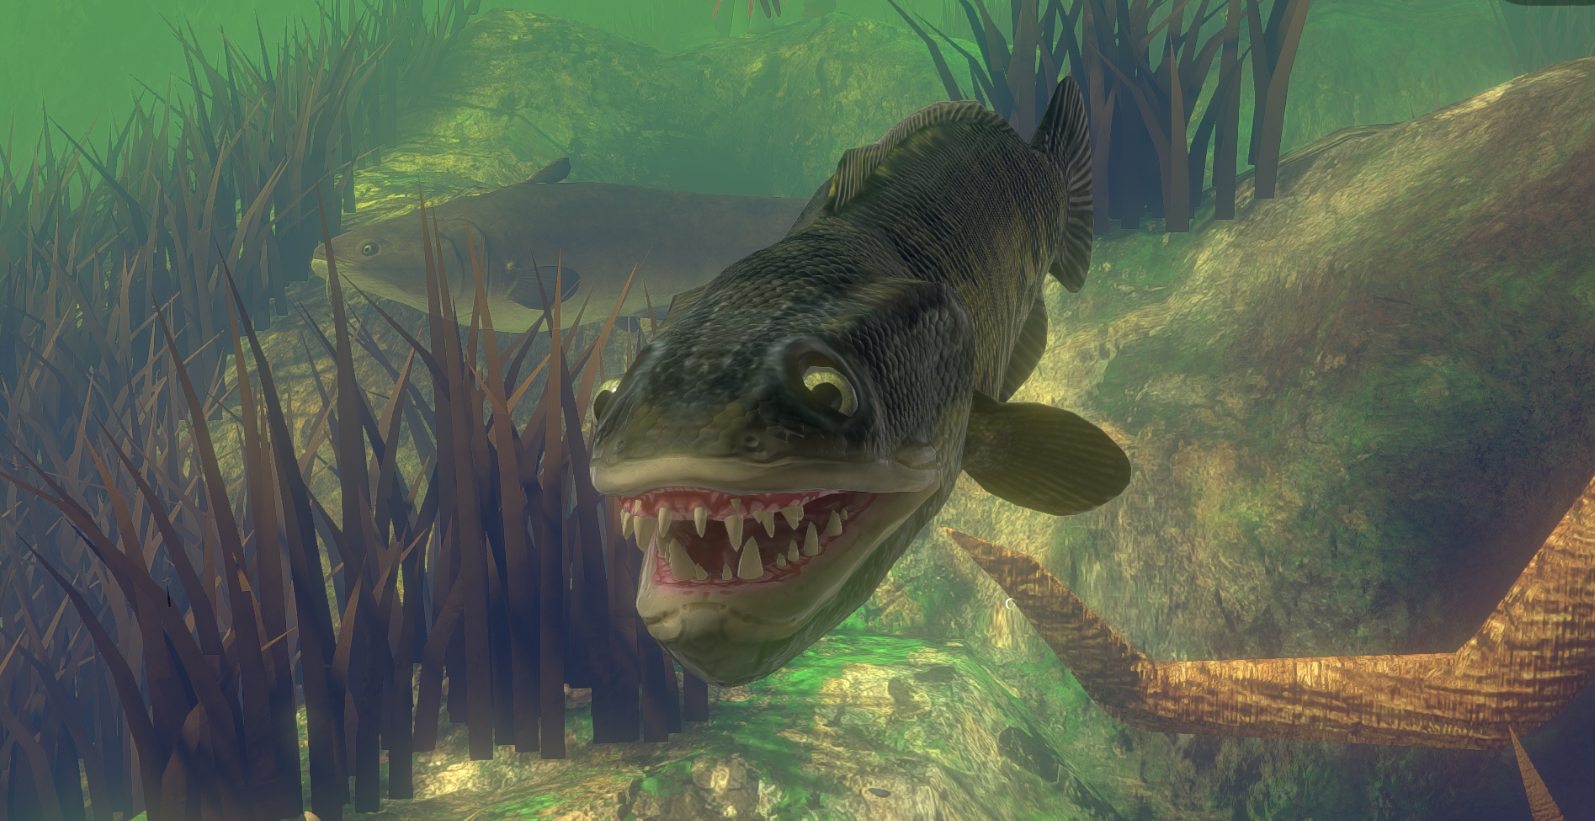 Feed and Grow Fish - NEW GIANT LEVEL 200 GOLIATH FISH TOO BIG FOR